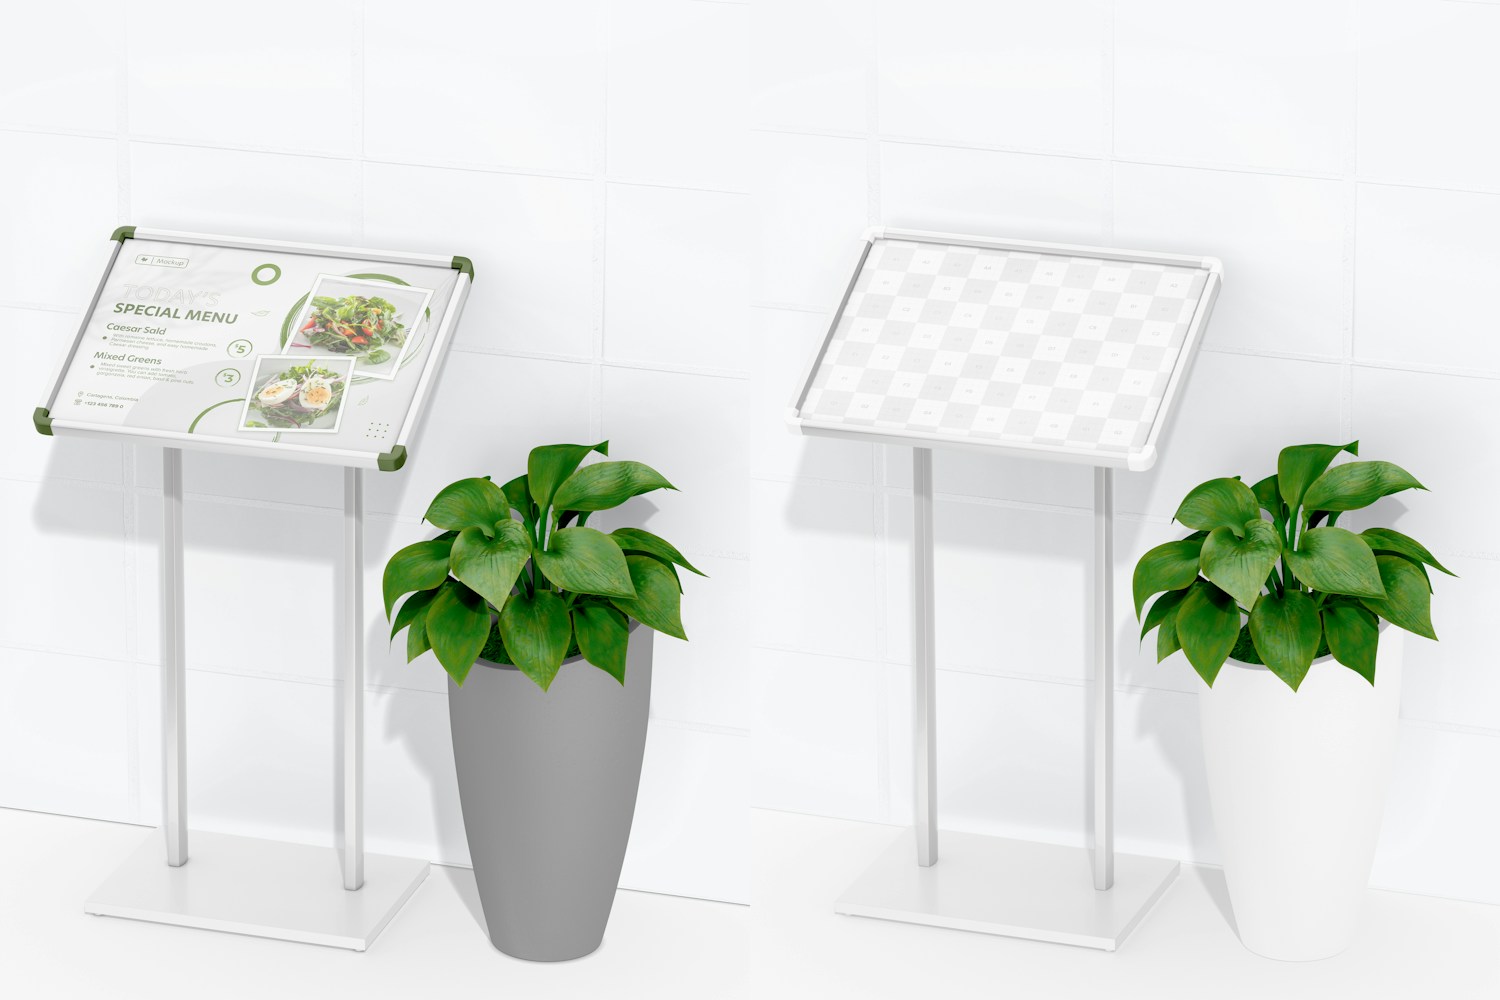 A2 Standard Menu Stand Mockup, with Plant